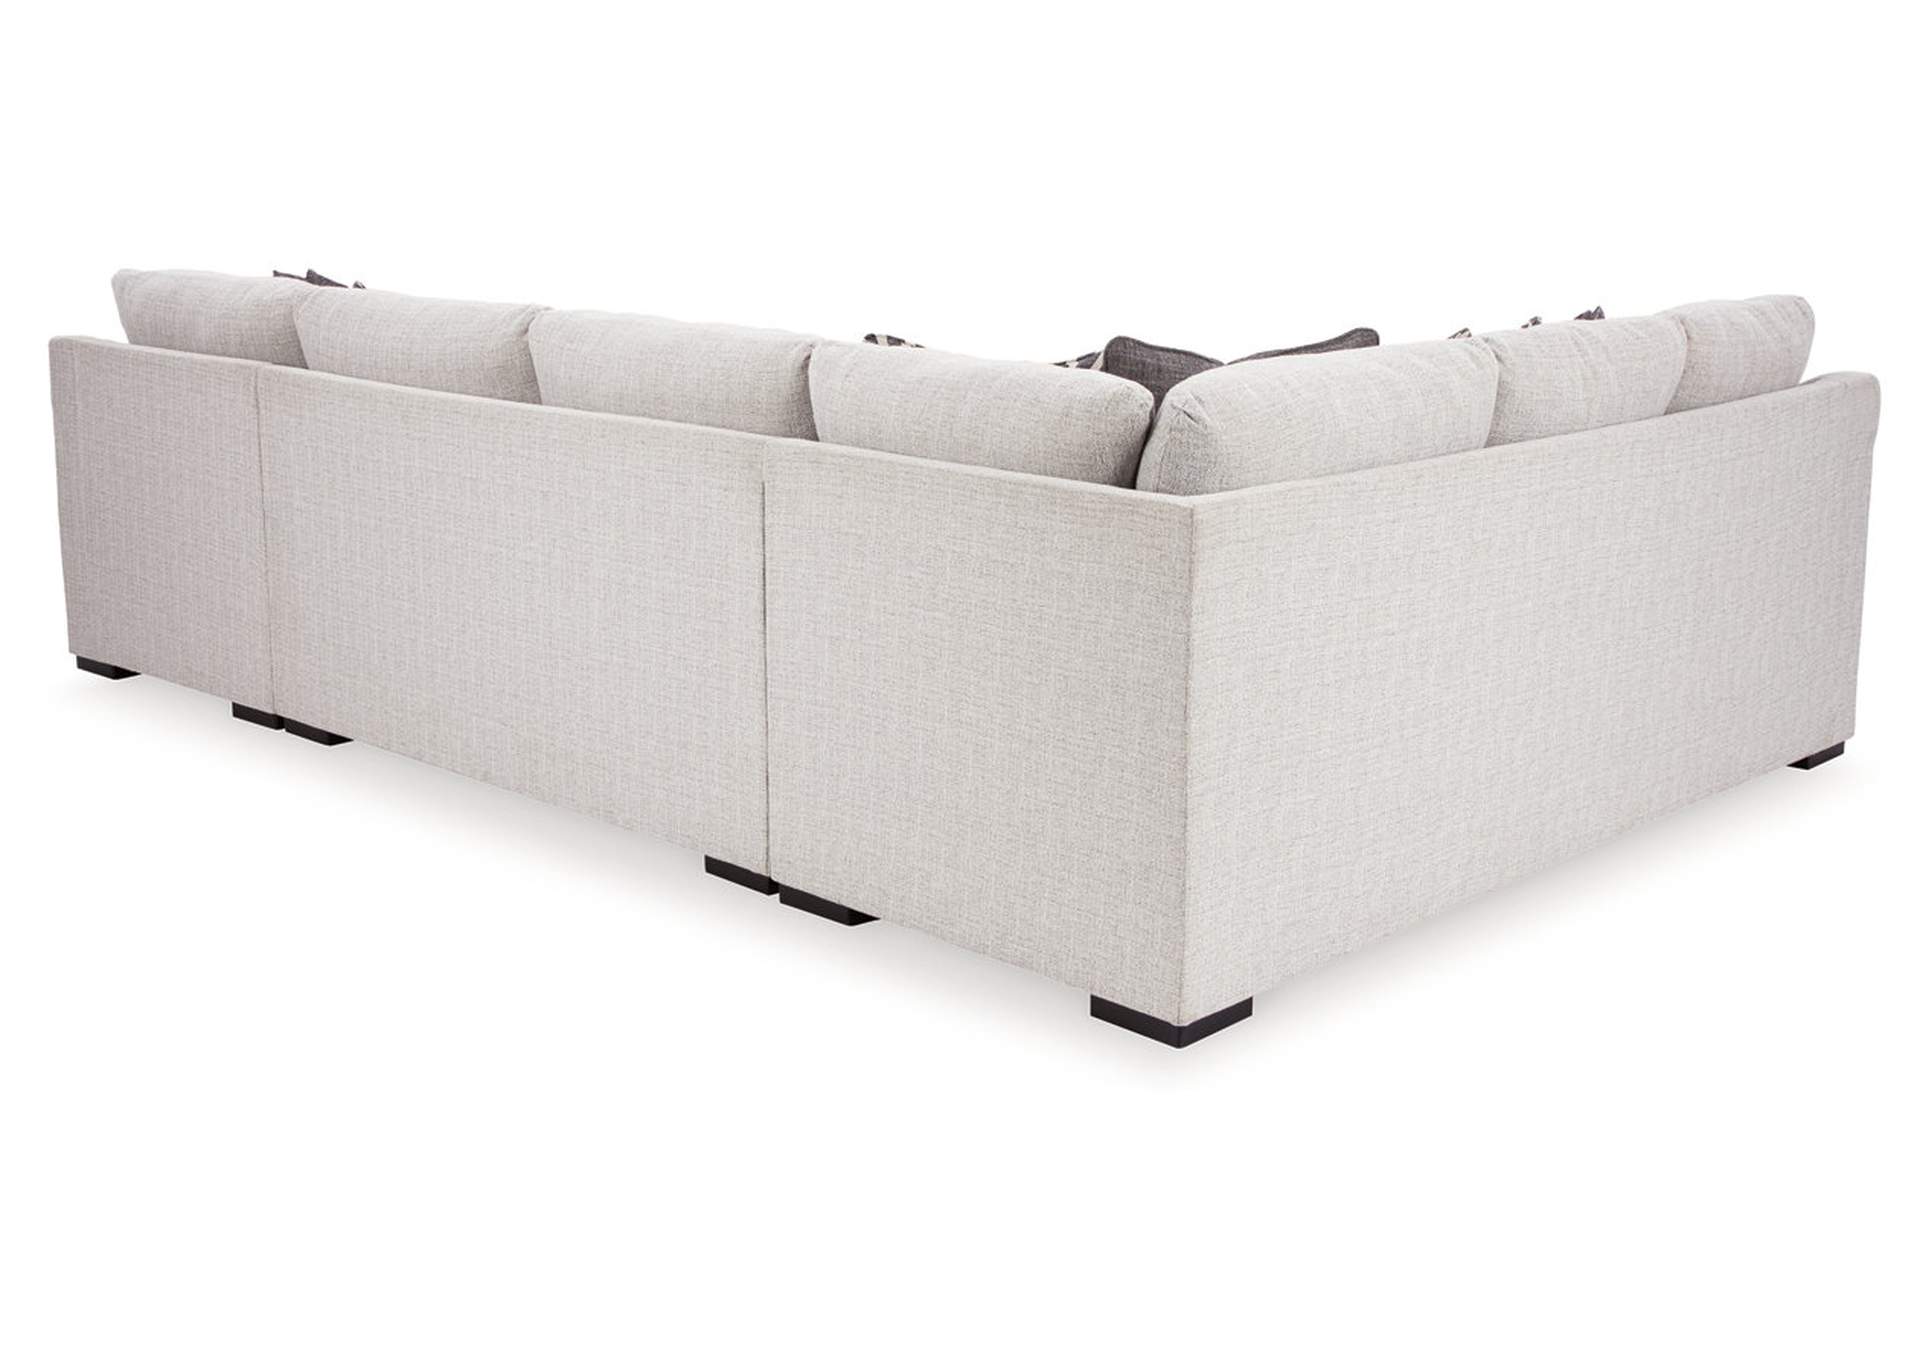 Koralynn 3-Piece Sectional with Ottoman,Benchcraft